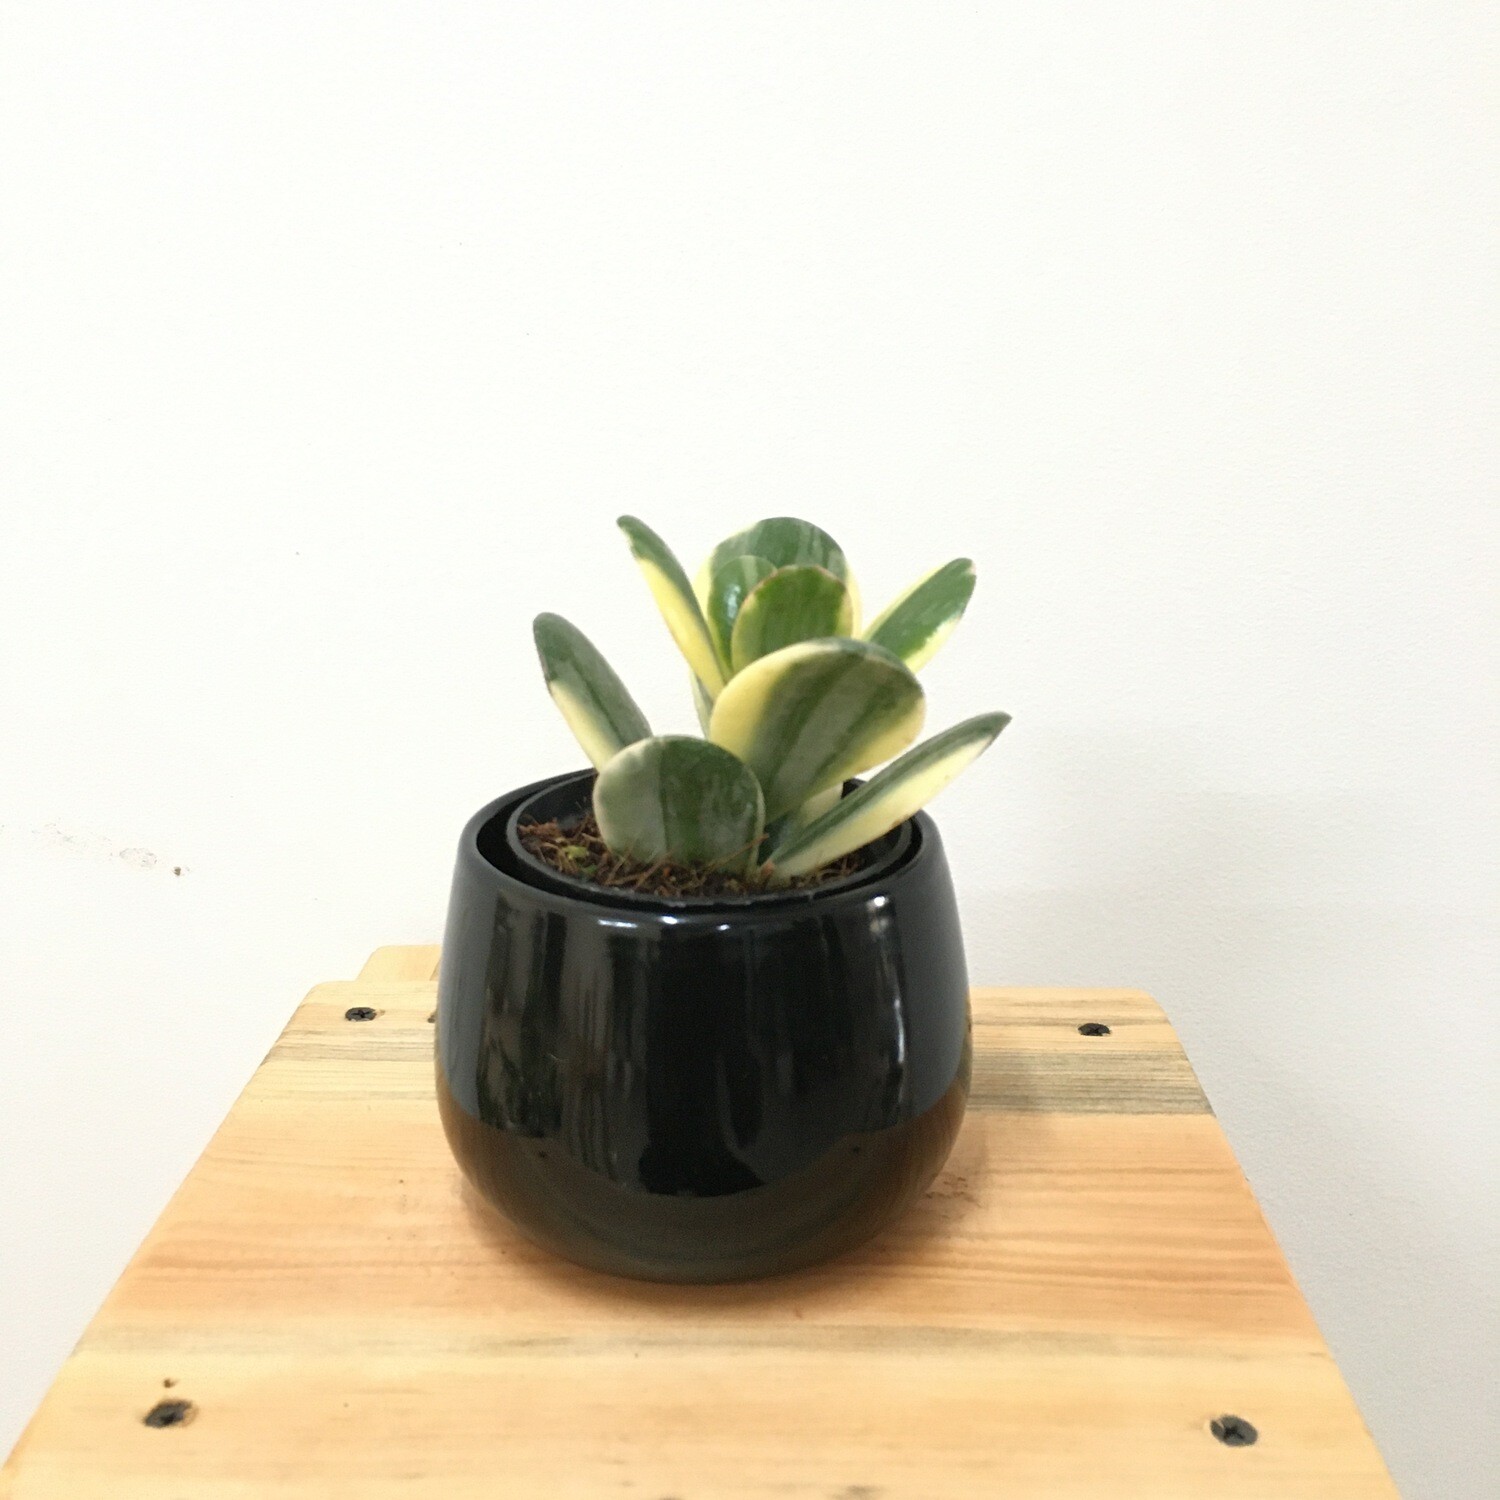 Variegated Jade Plant in 4 inches Unami Bowl - Multi Color